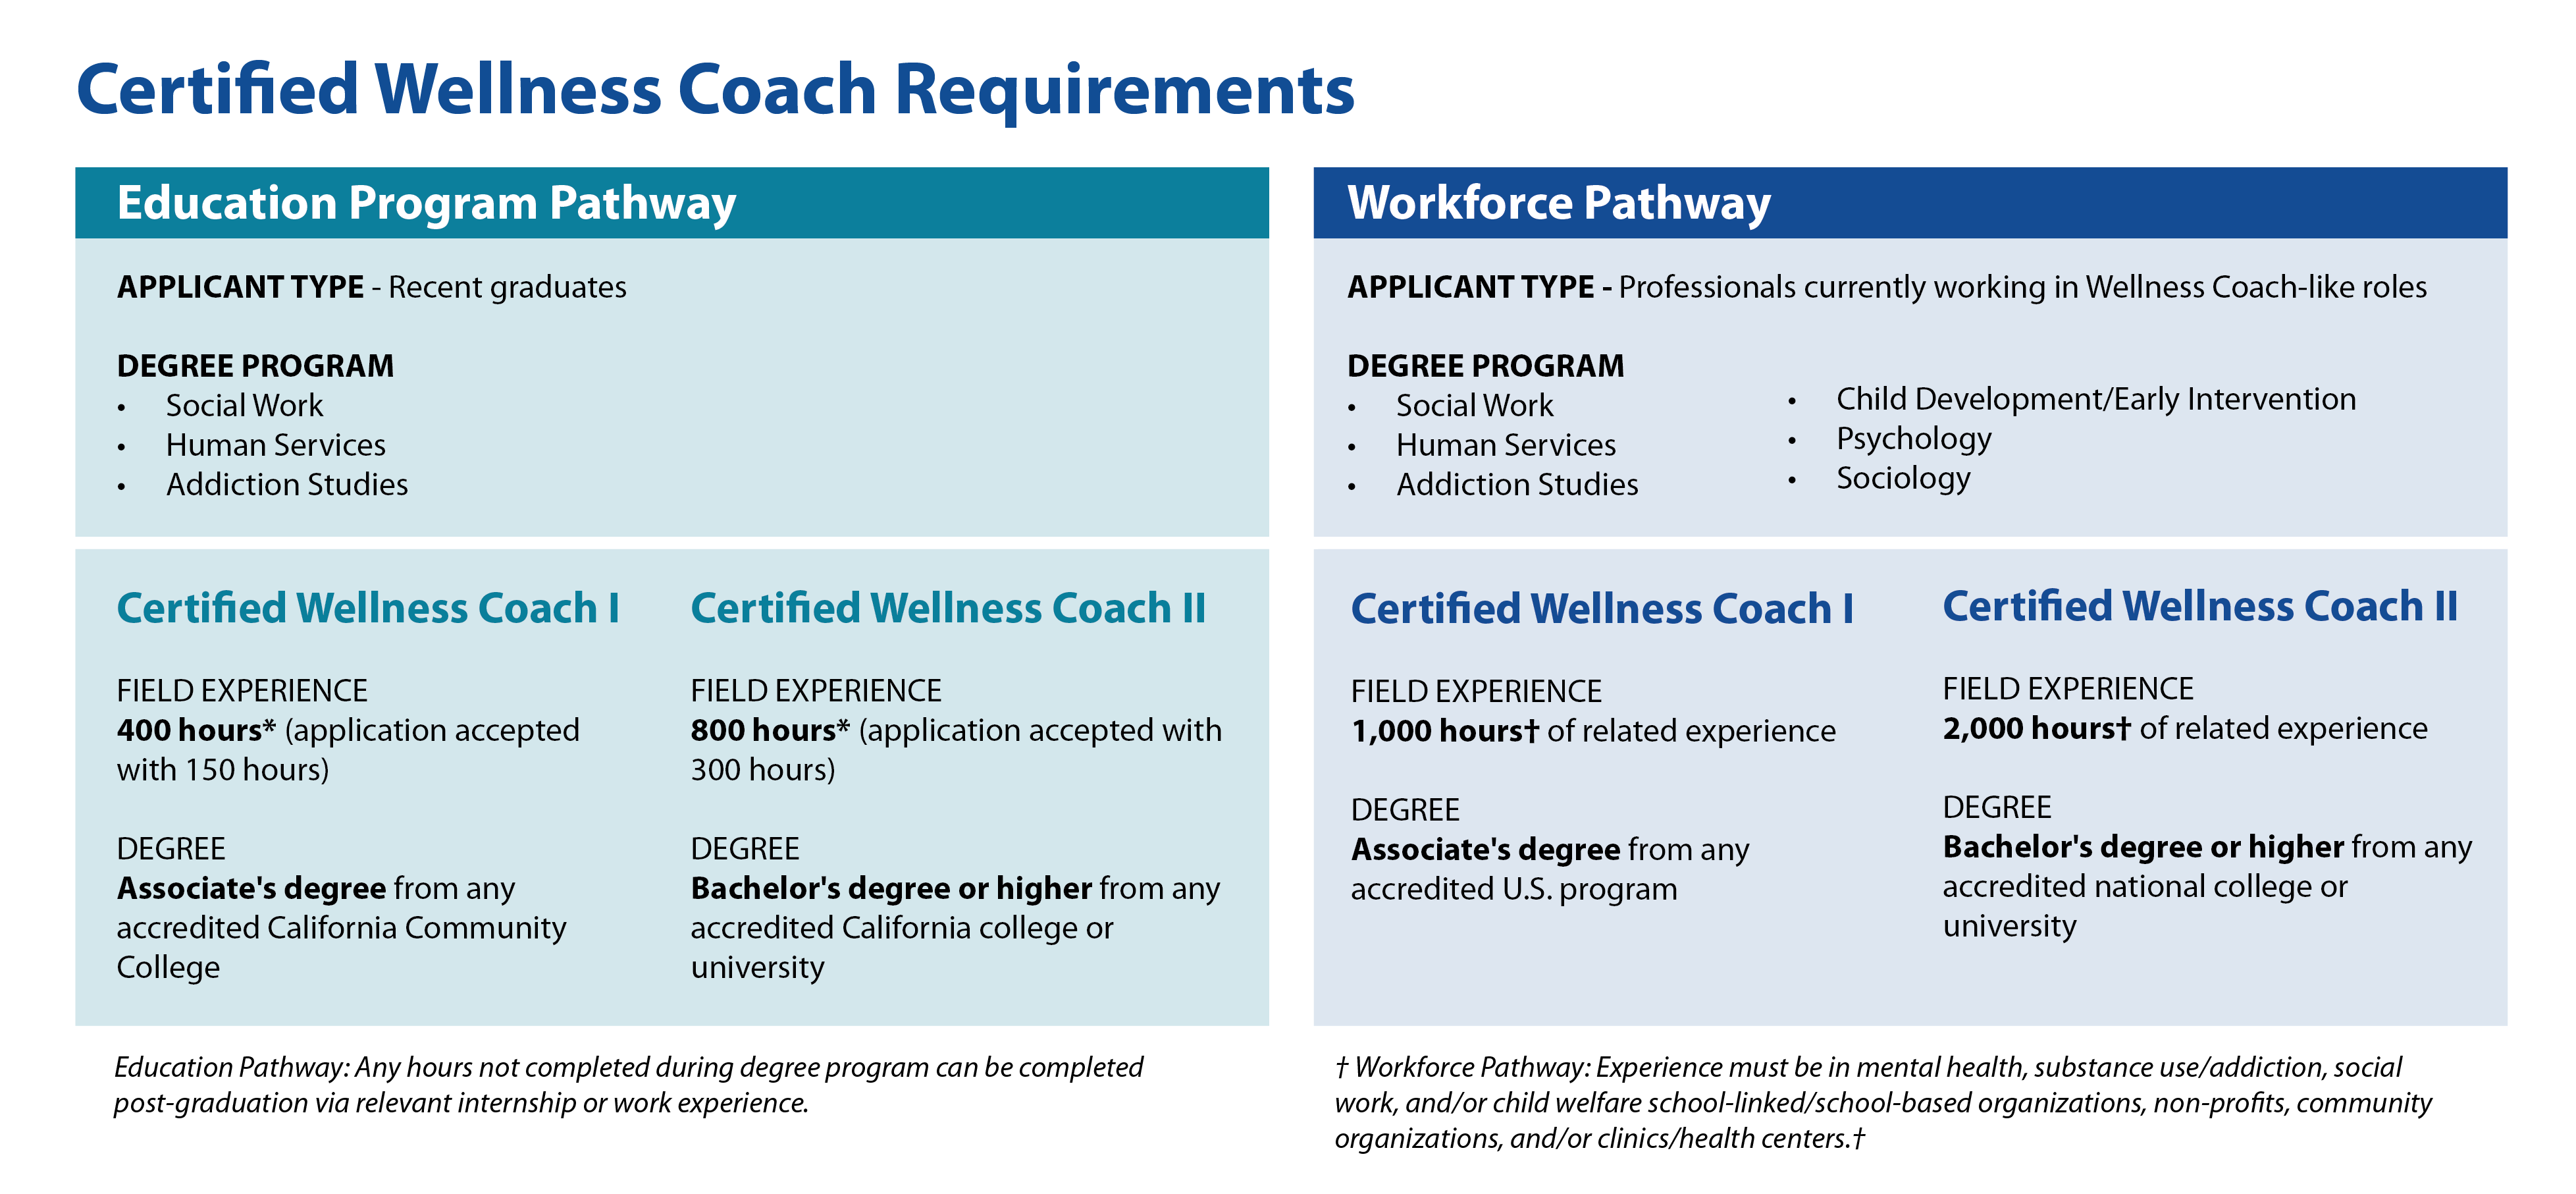 Certified Wellness Coach Requirements